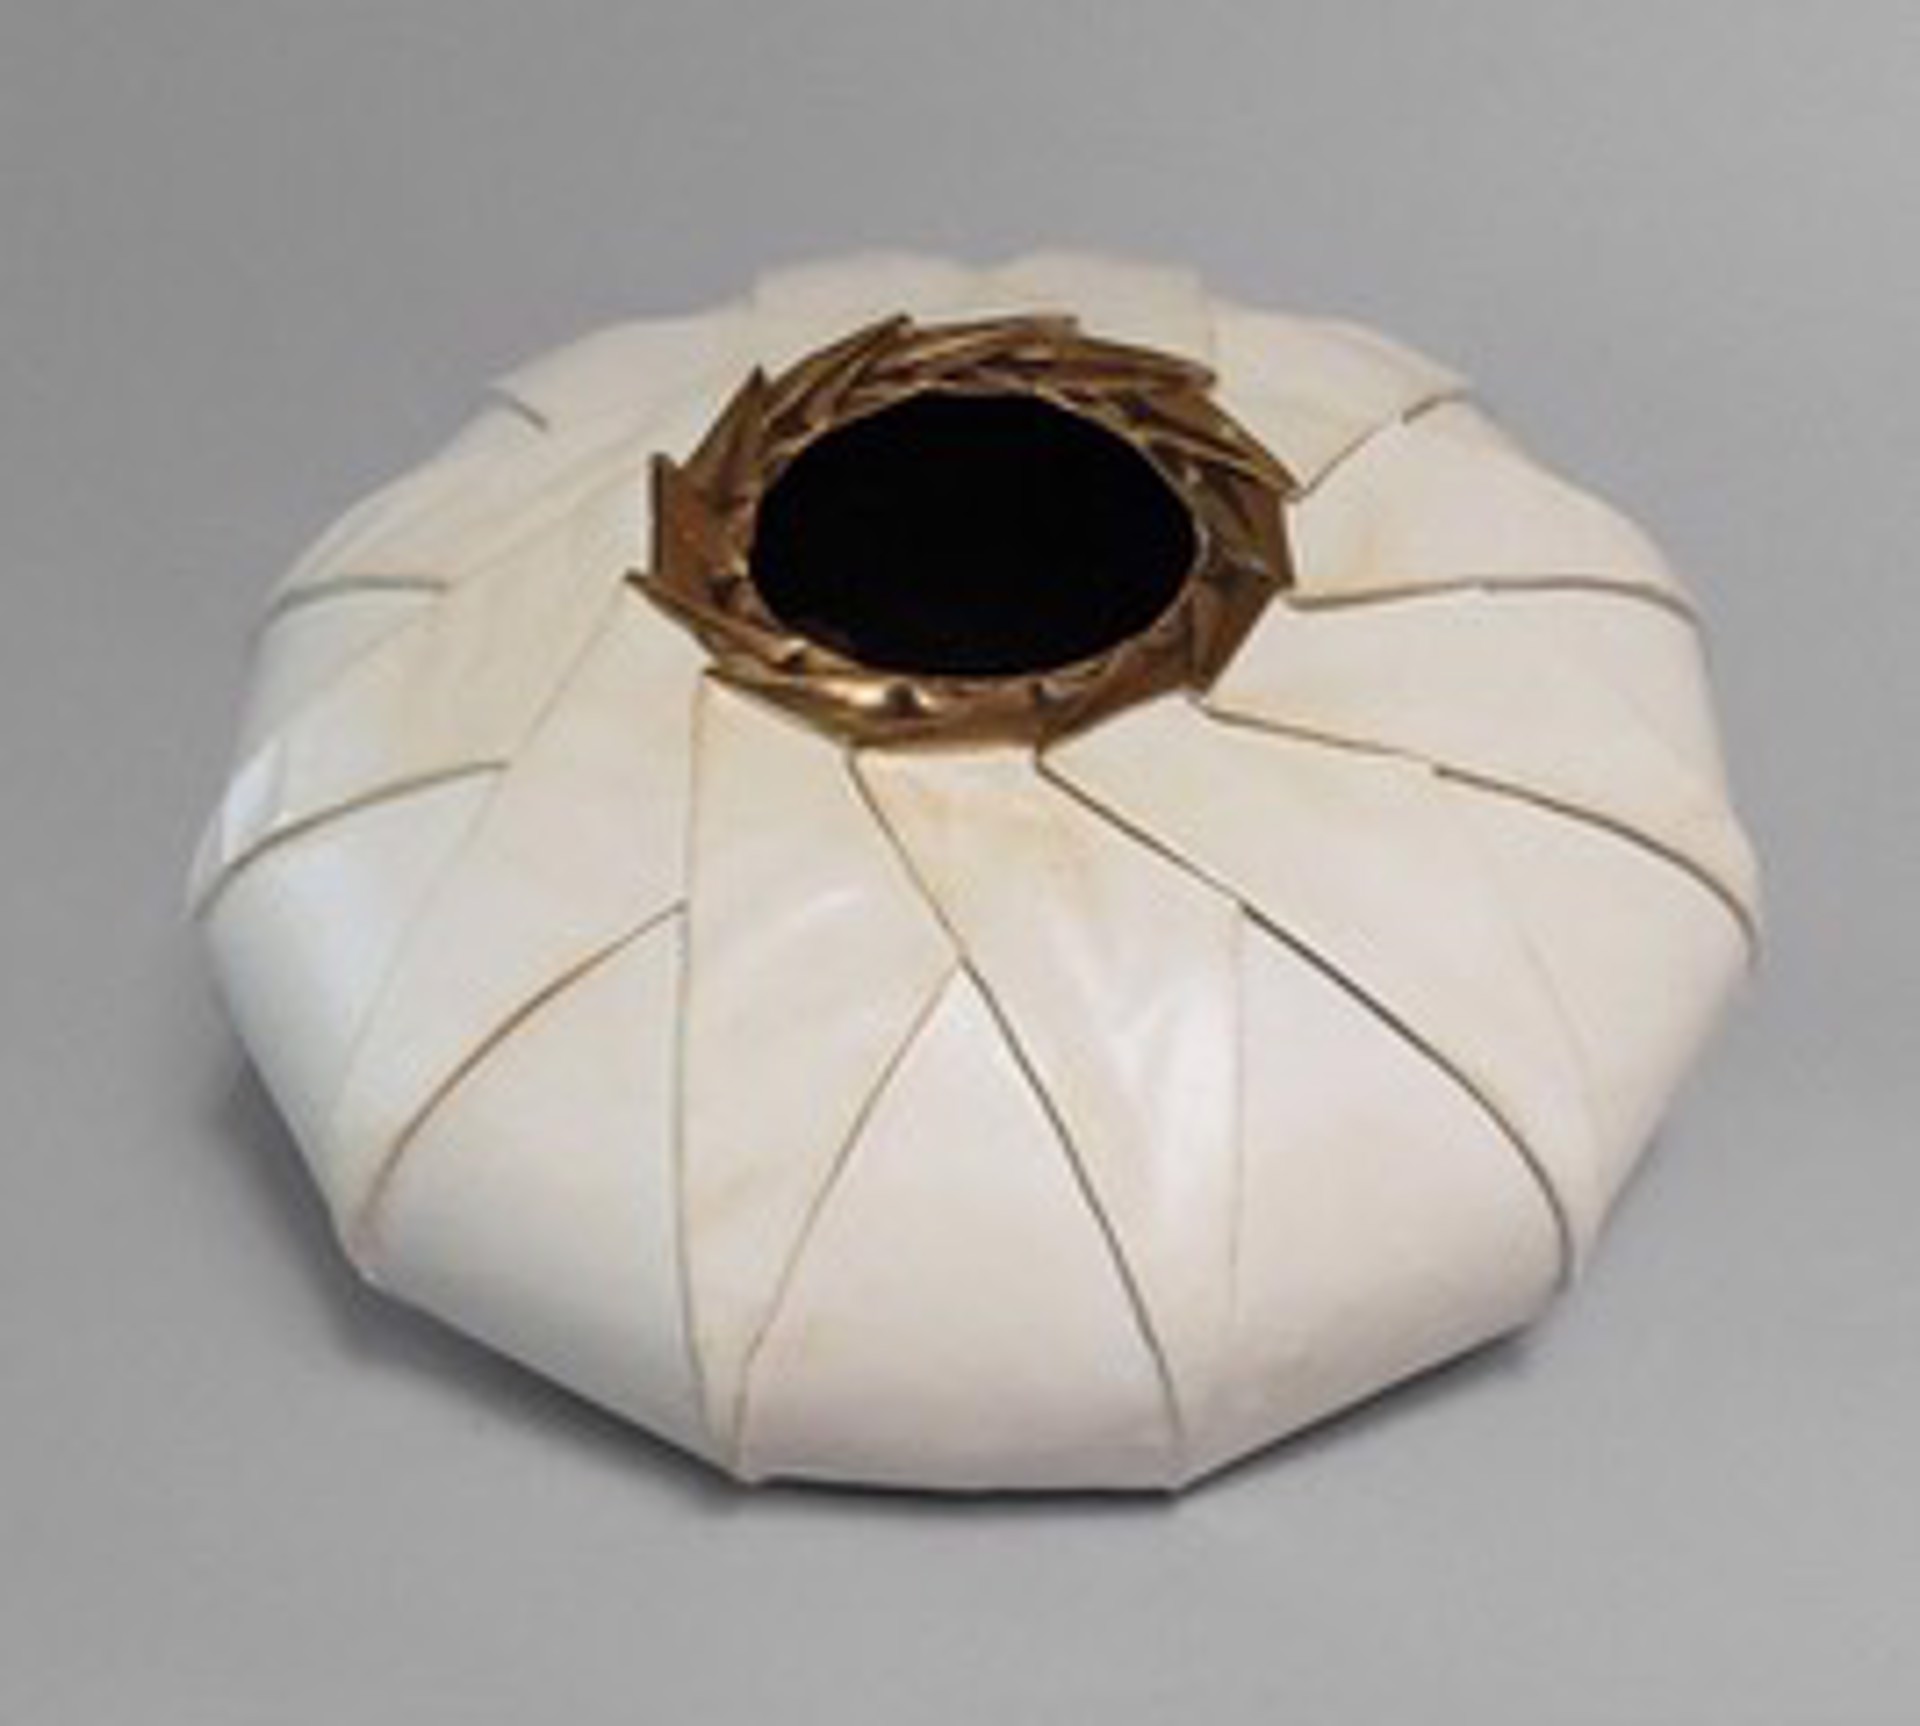 Seed Pot (collaboration with Robert Lang) by KEVIN BOX